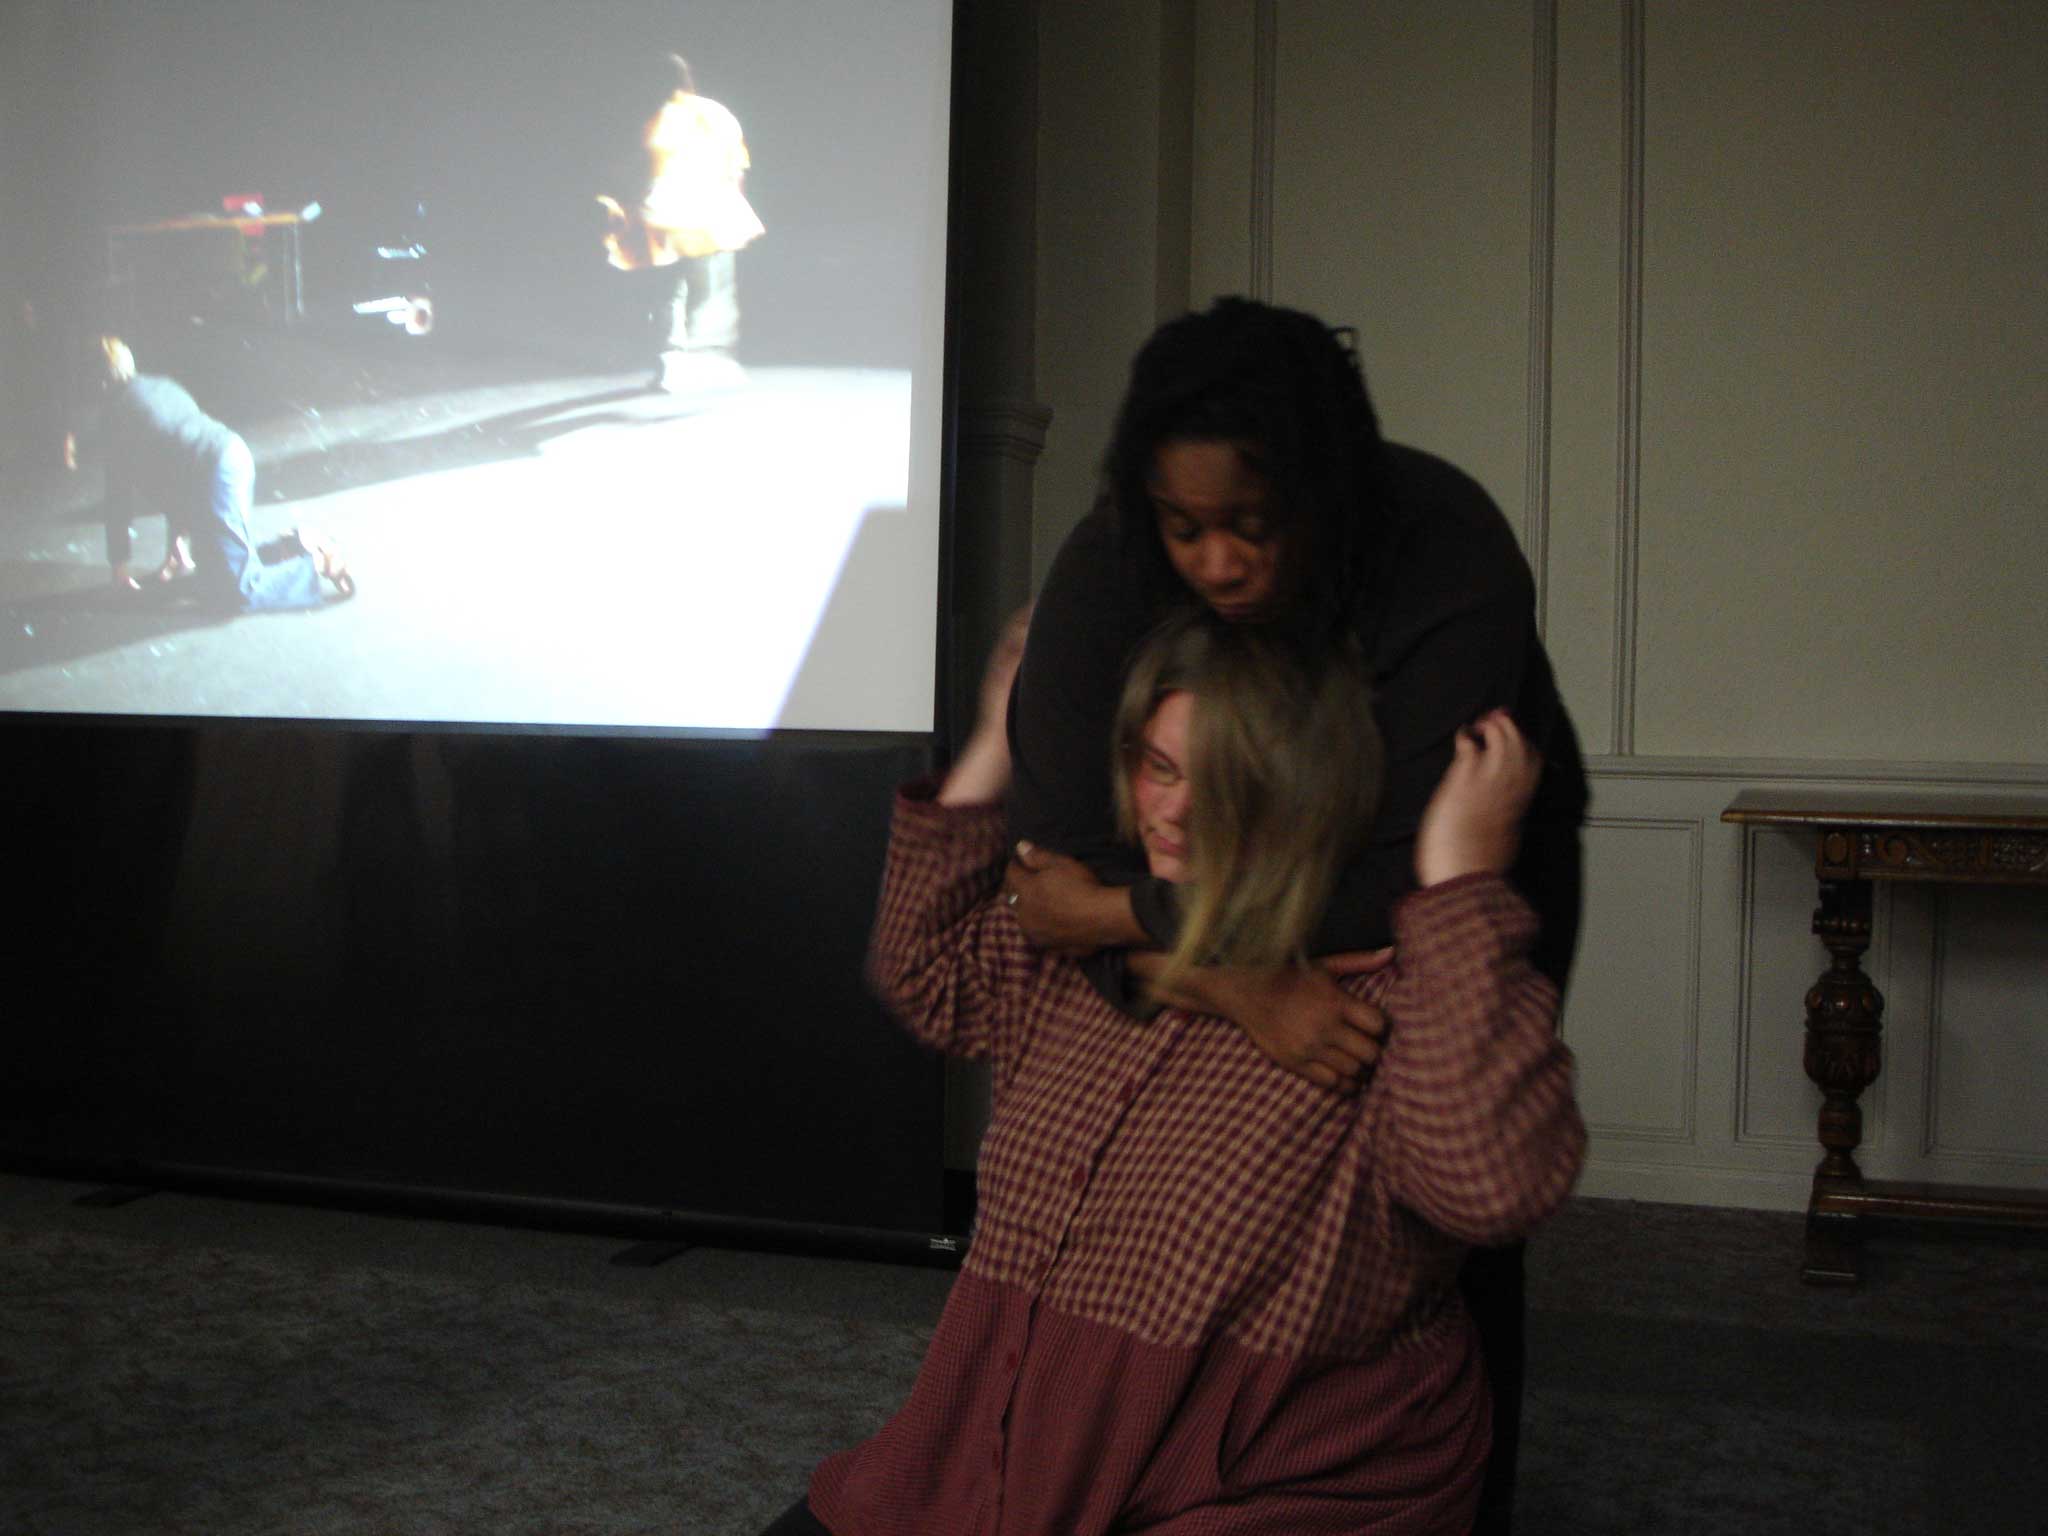 Anita and Petra dancing together, cradling and comforting each other, in front of a projection screen that shows Carrie dancing in the theatre in Montgomery